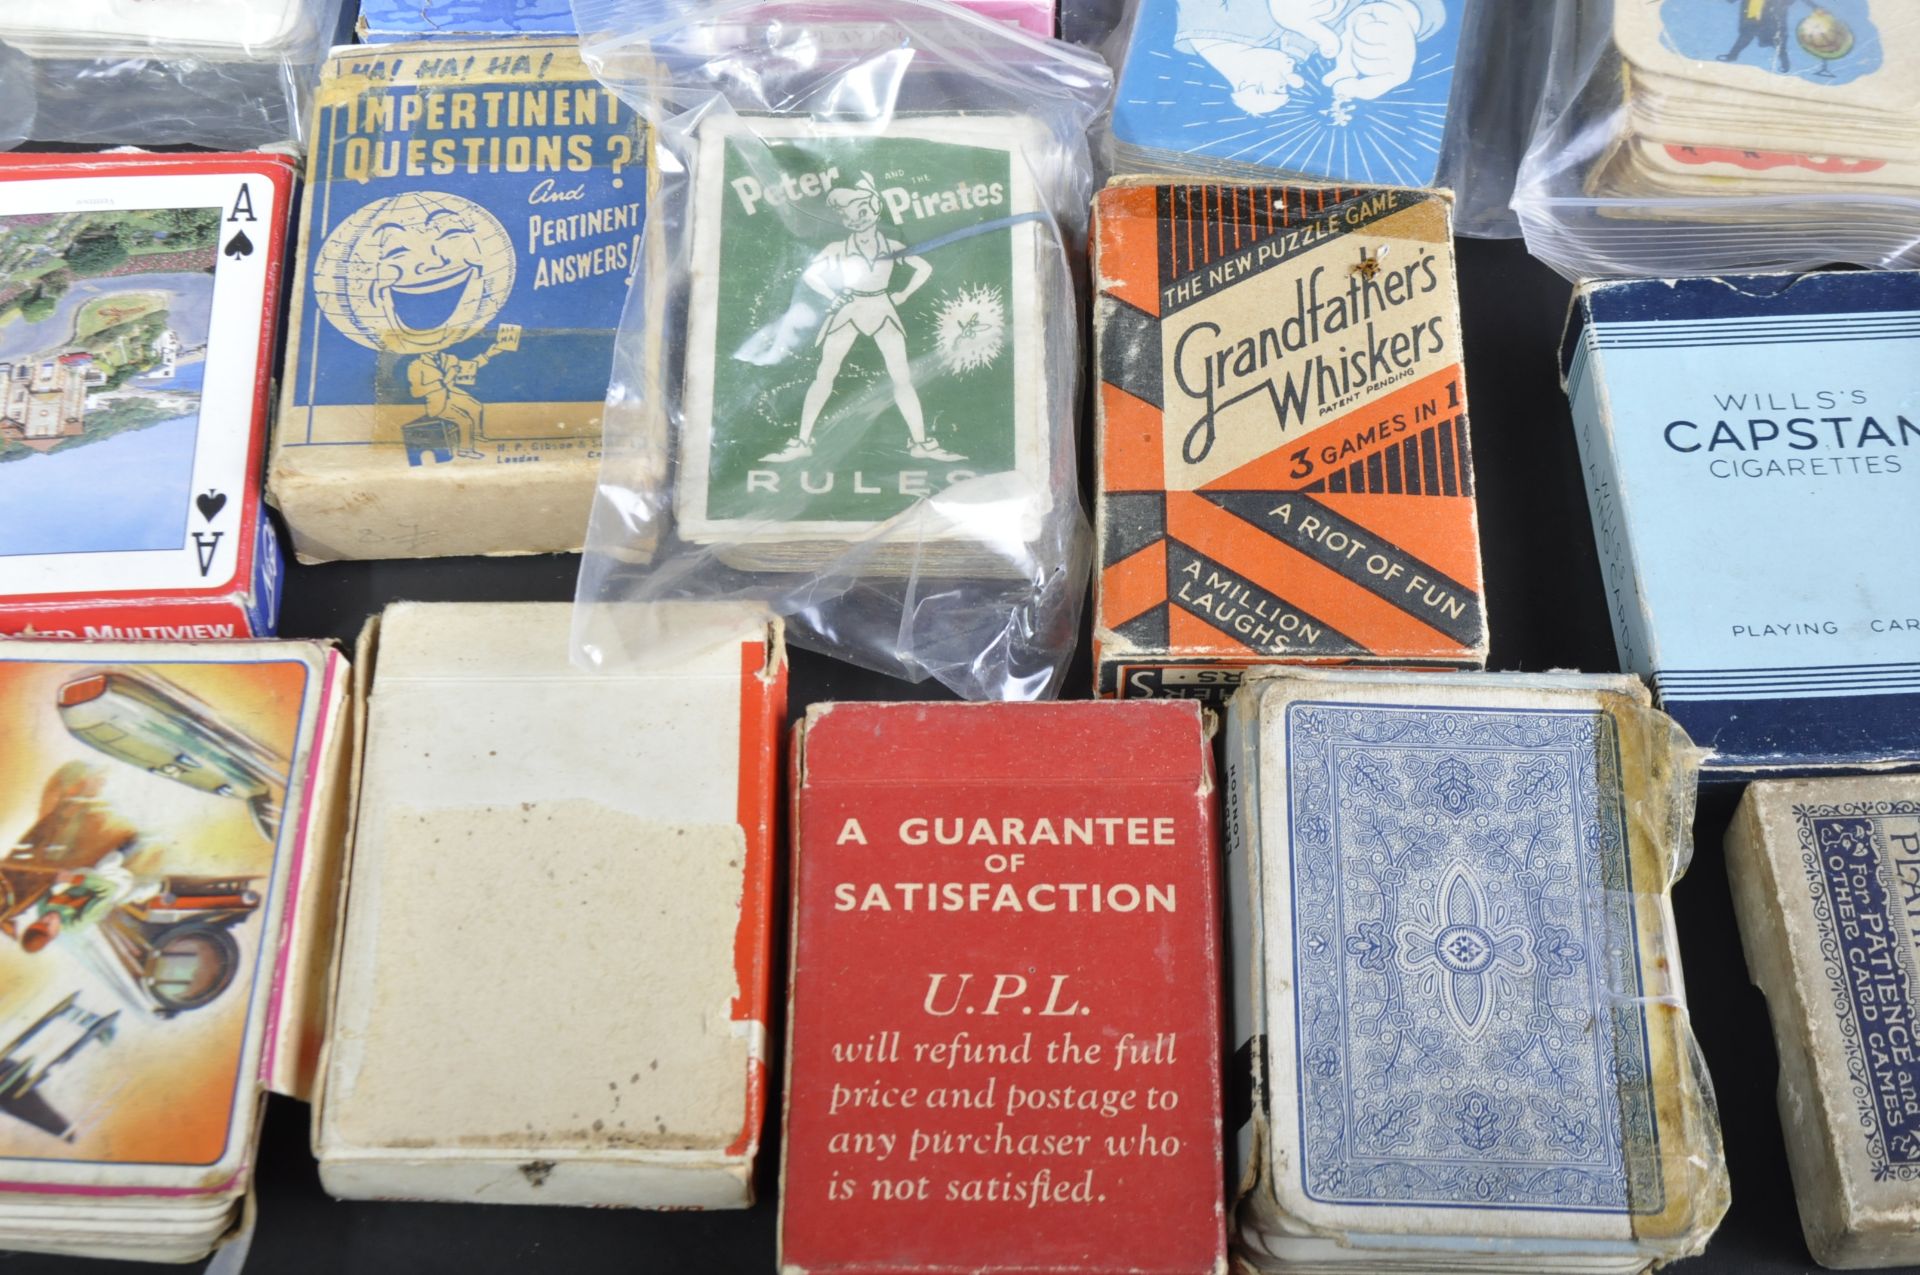 LARGE COLLECTION OF ASSORTED VINTAGE PLAYING CARD DECKS - Image 3 of 5